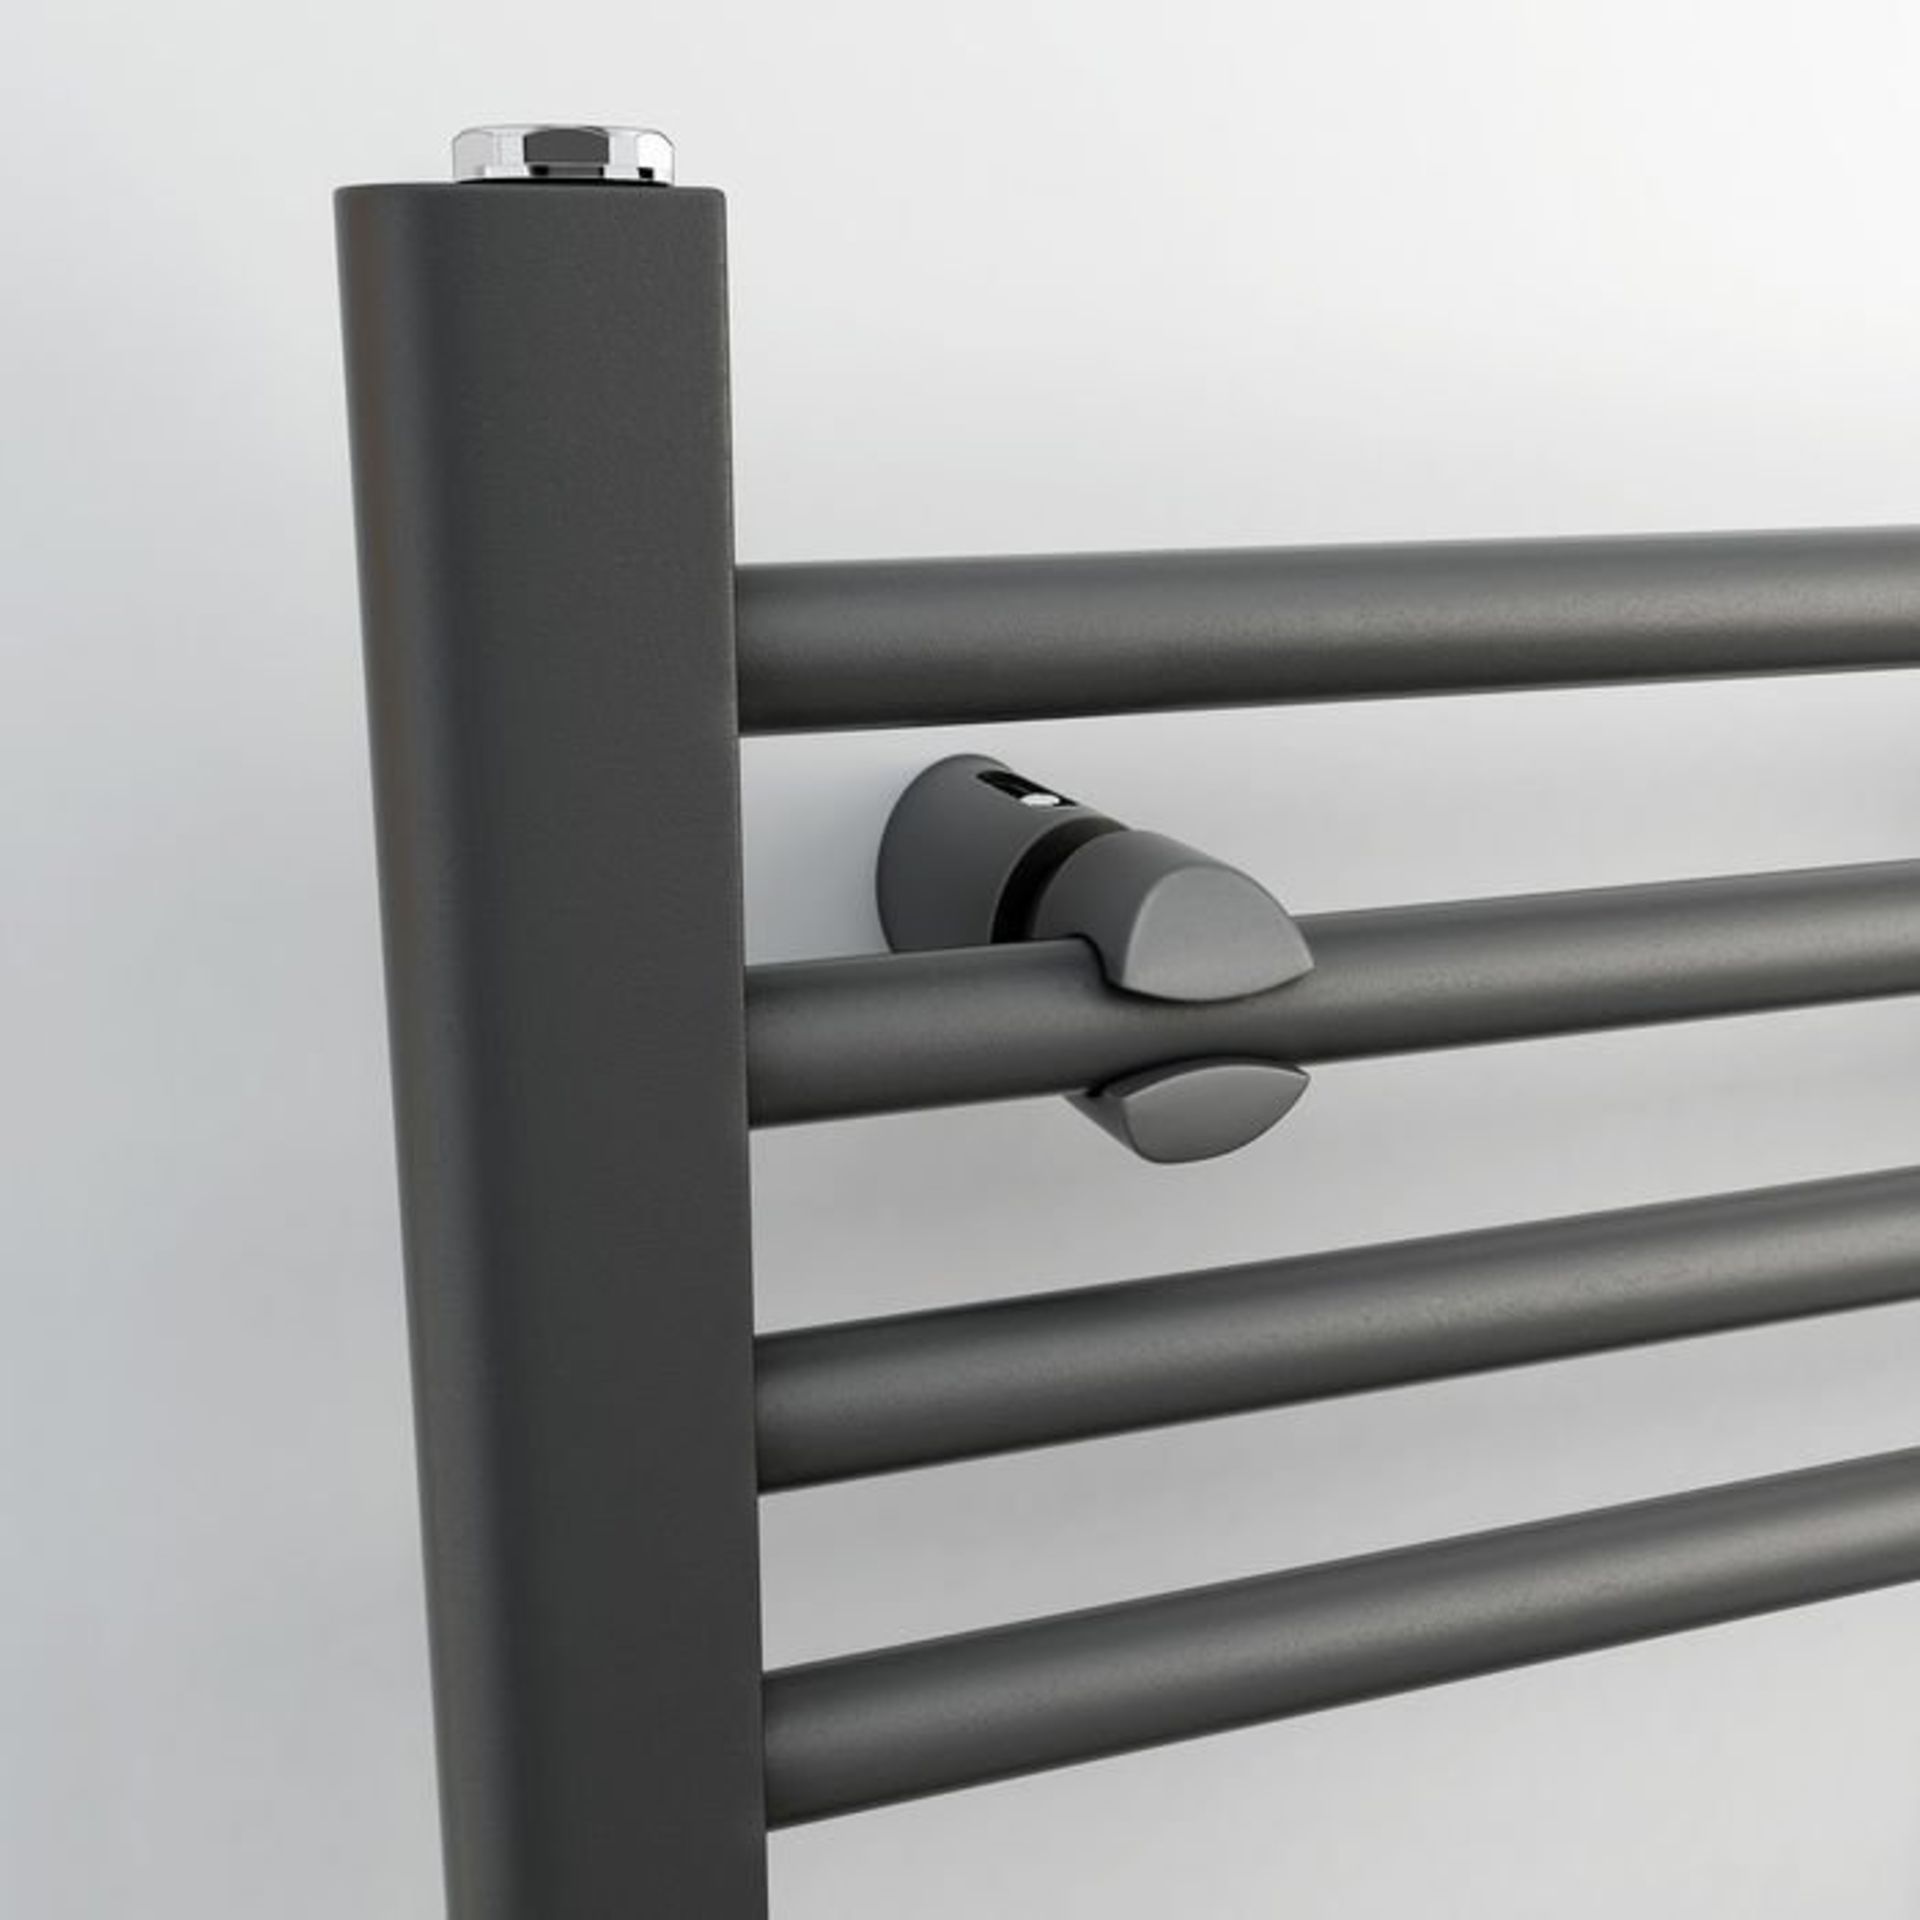 (H102) 1600x600mm - 20mm Tubes - Anthracite Heated Straight Rail Ladder Towel Radiator . Corrosion - Image 3 of 3